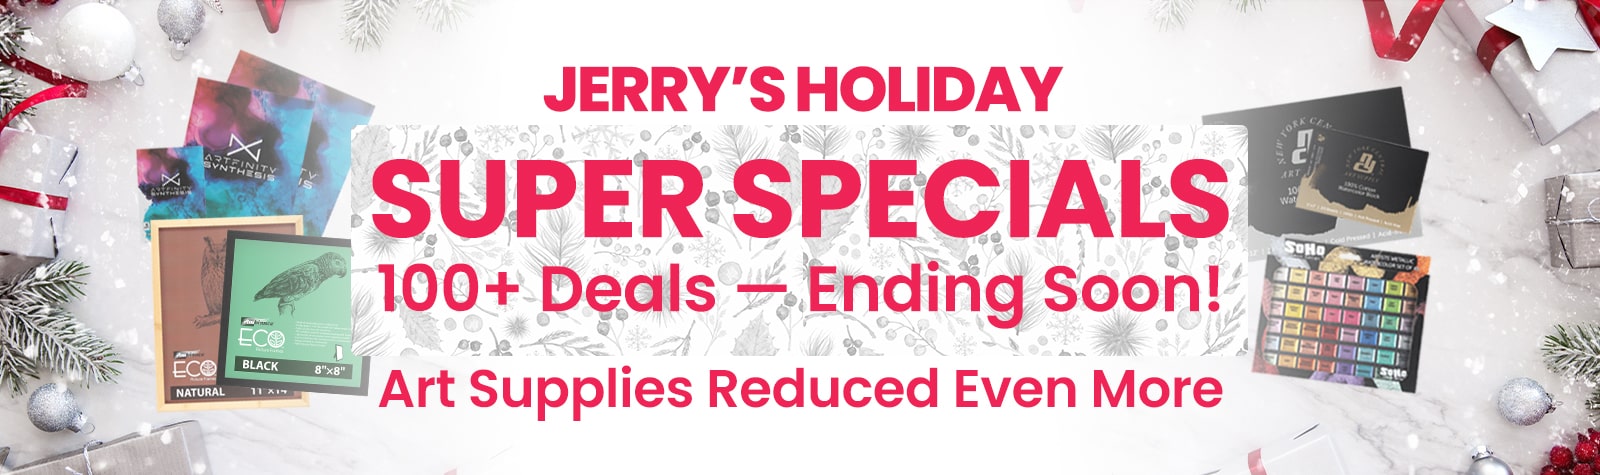 Jerry's Holiday Super Specials